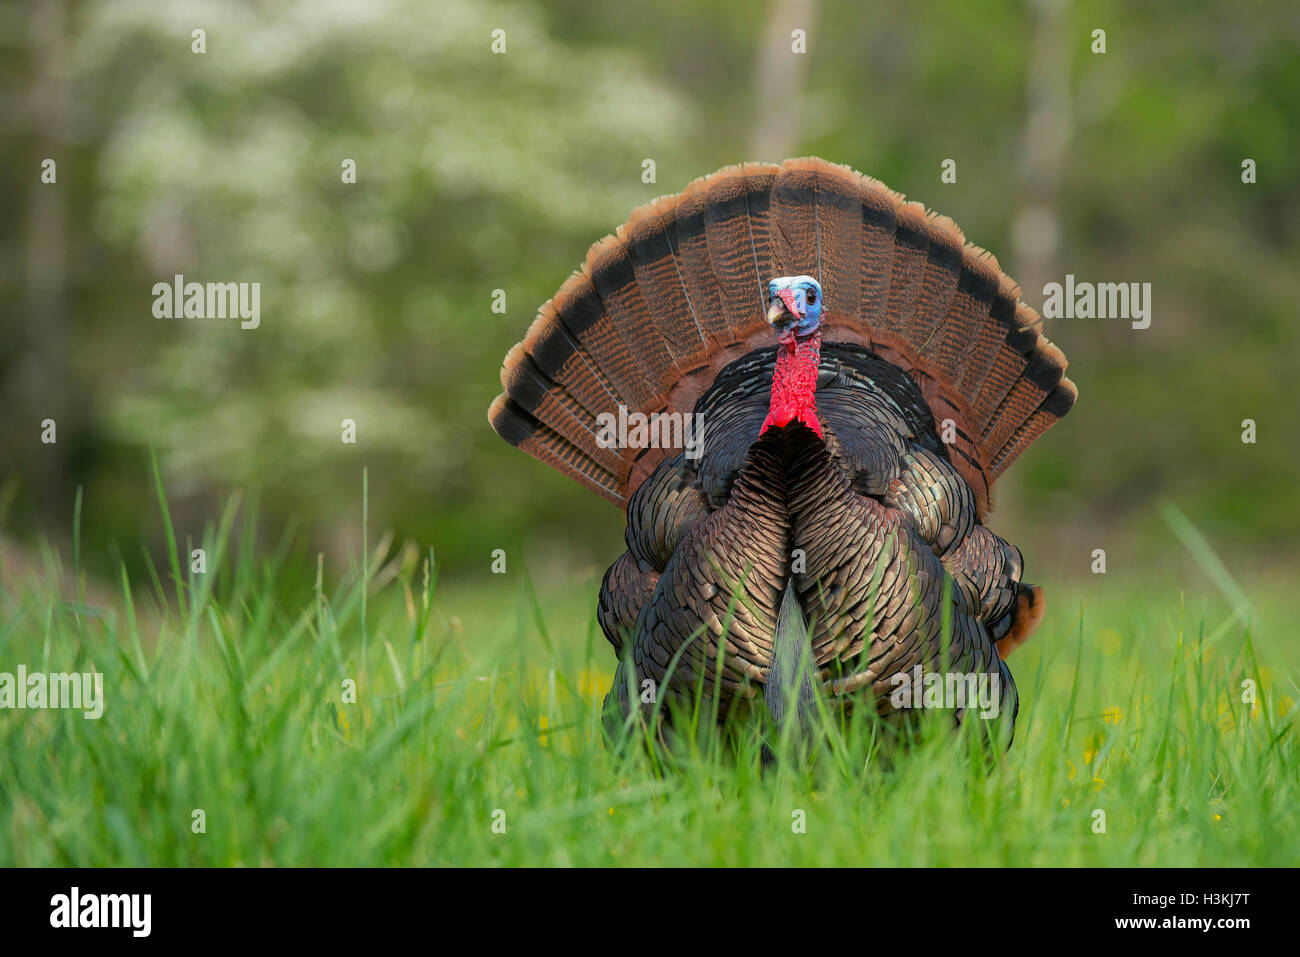 Wild Turkey (Meleagris gallopavo) Young male or Tom, displaying tail feathers, Southeastern United States Stock Photo